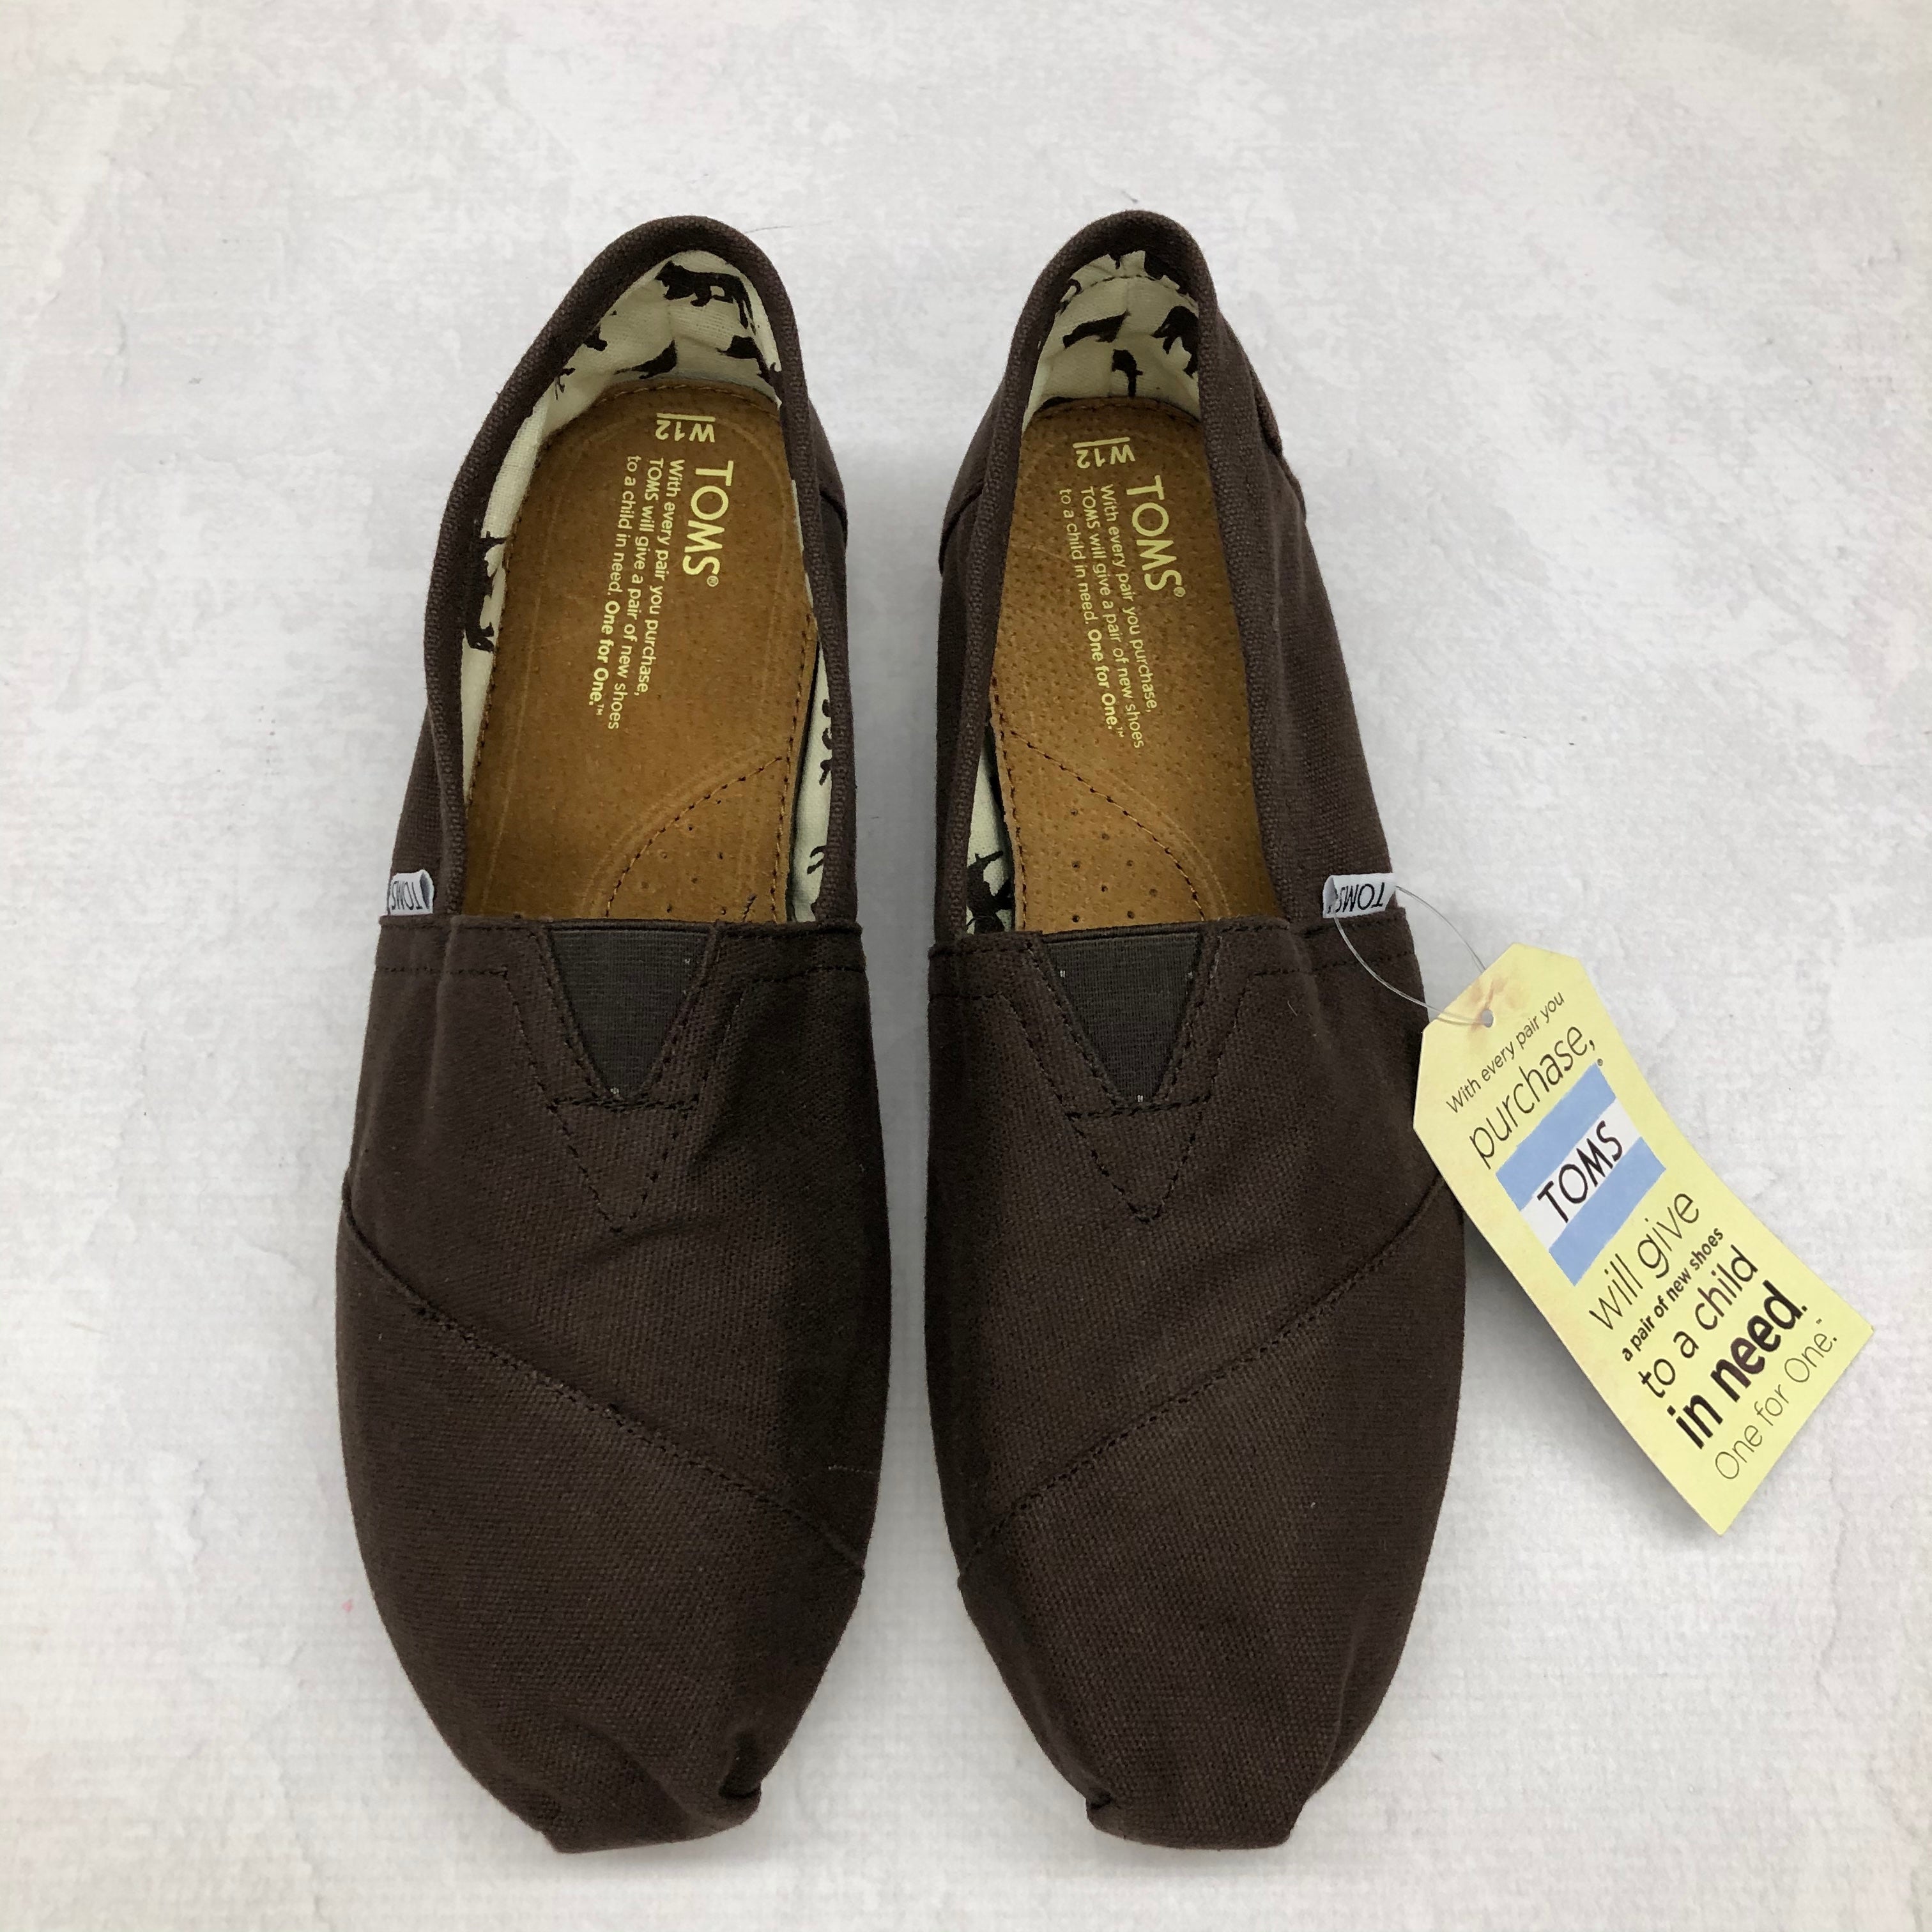 Shoes Flats By Toms Size: 12 – #191 